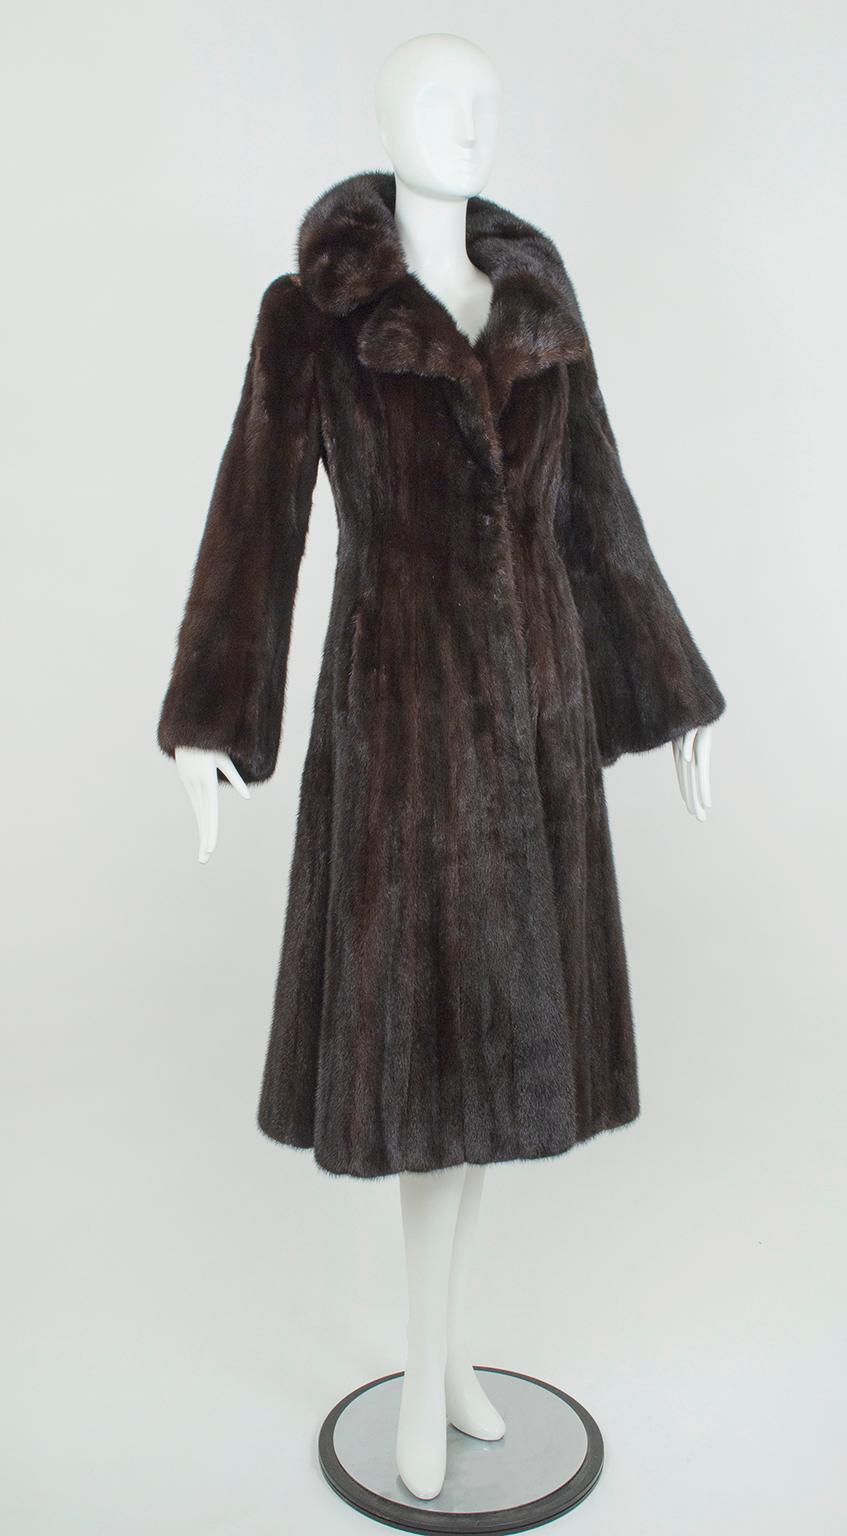 The mink to end all mink coats, this extraordinary Revillon features a princess silhouette fit for a Russian Tsarina and a dramatic wide, notched collar that can be worn open, standing, or buttoned to the throat for extra warmth. Immaculately made